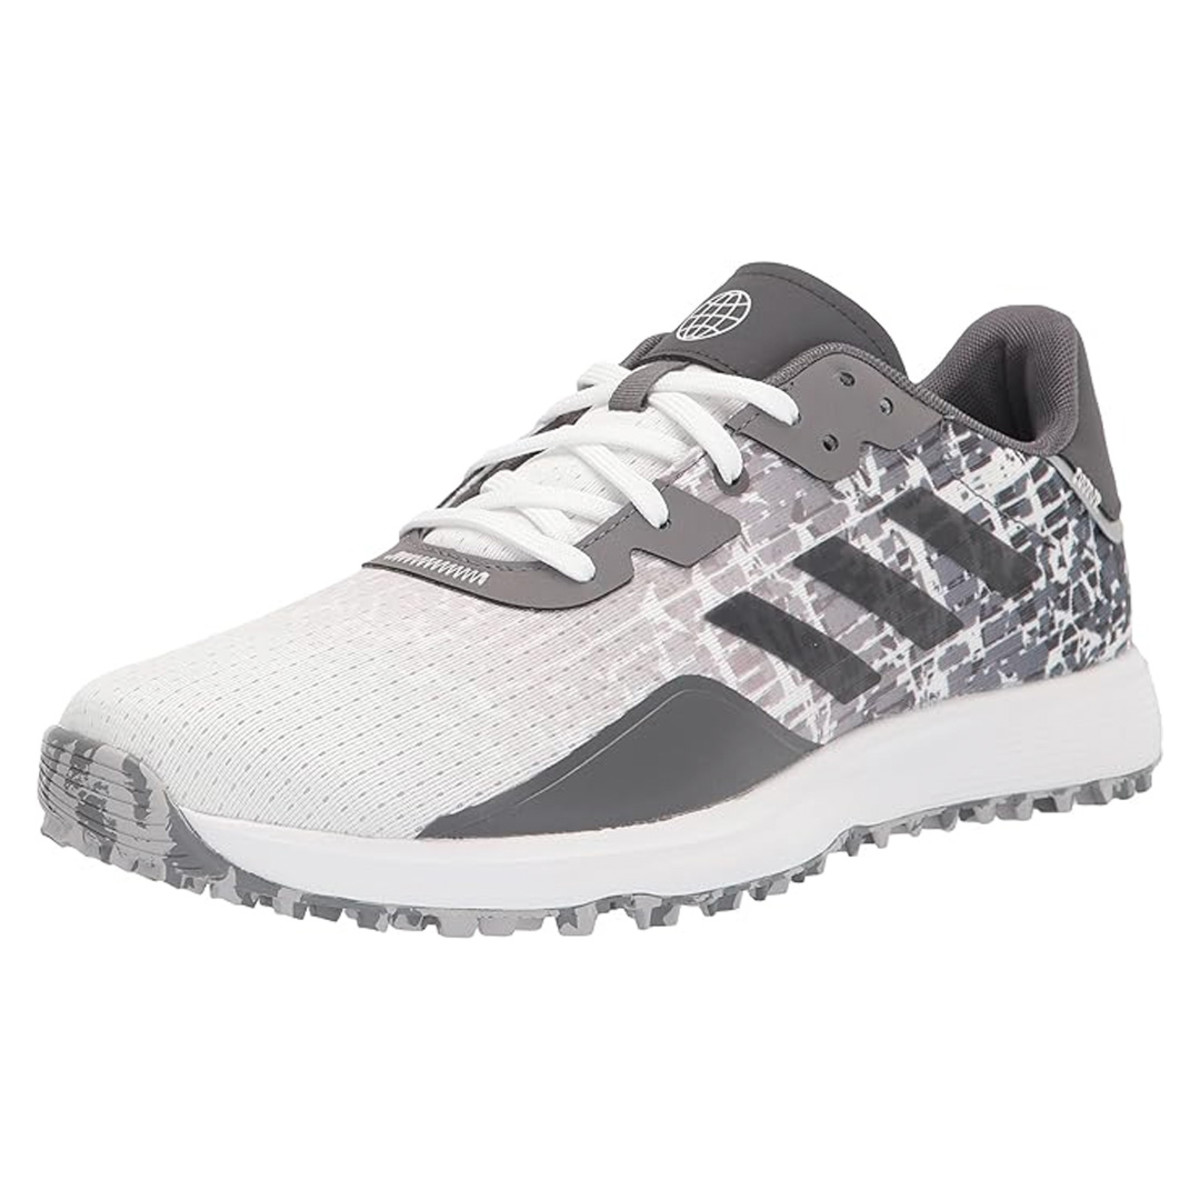 The Adidas S2G Spikeless 23 Golf Shoes in Footwear White are on sale right now at Amazon